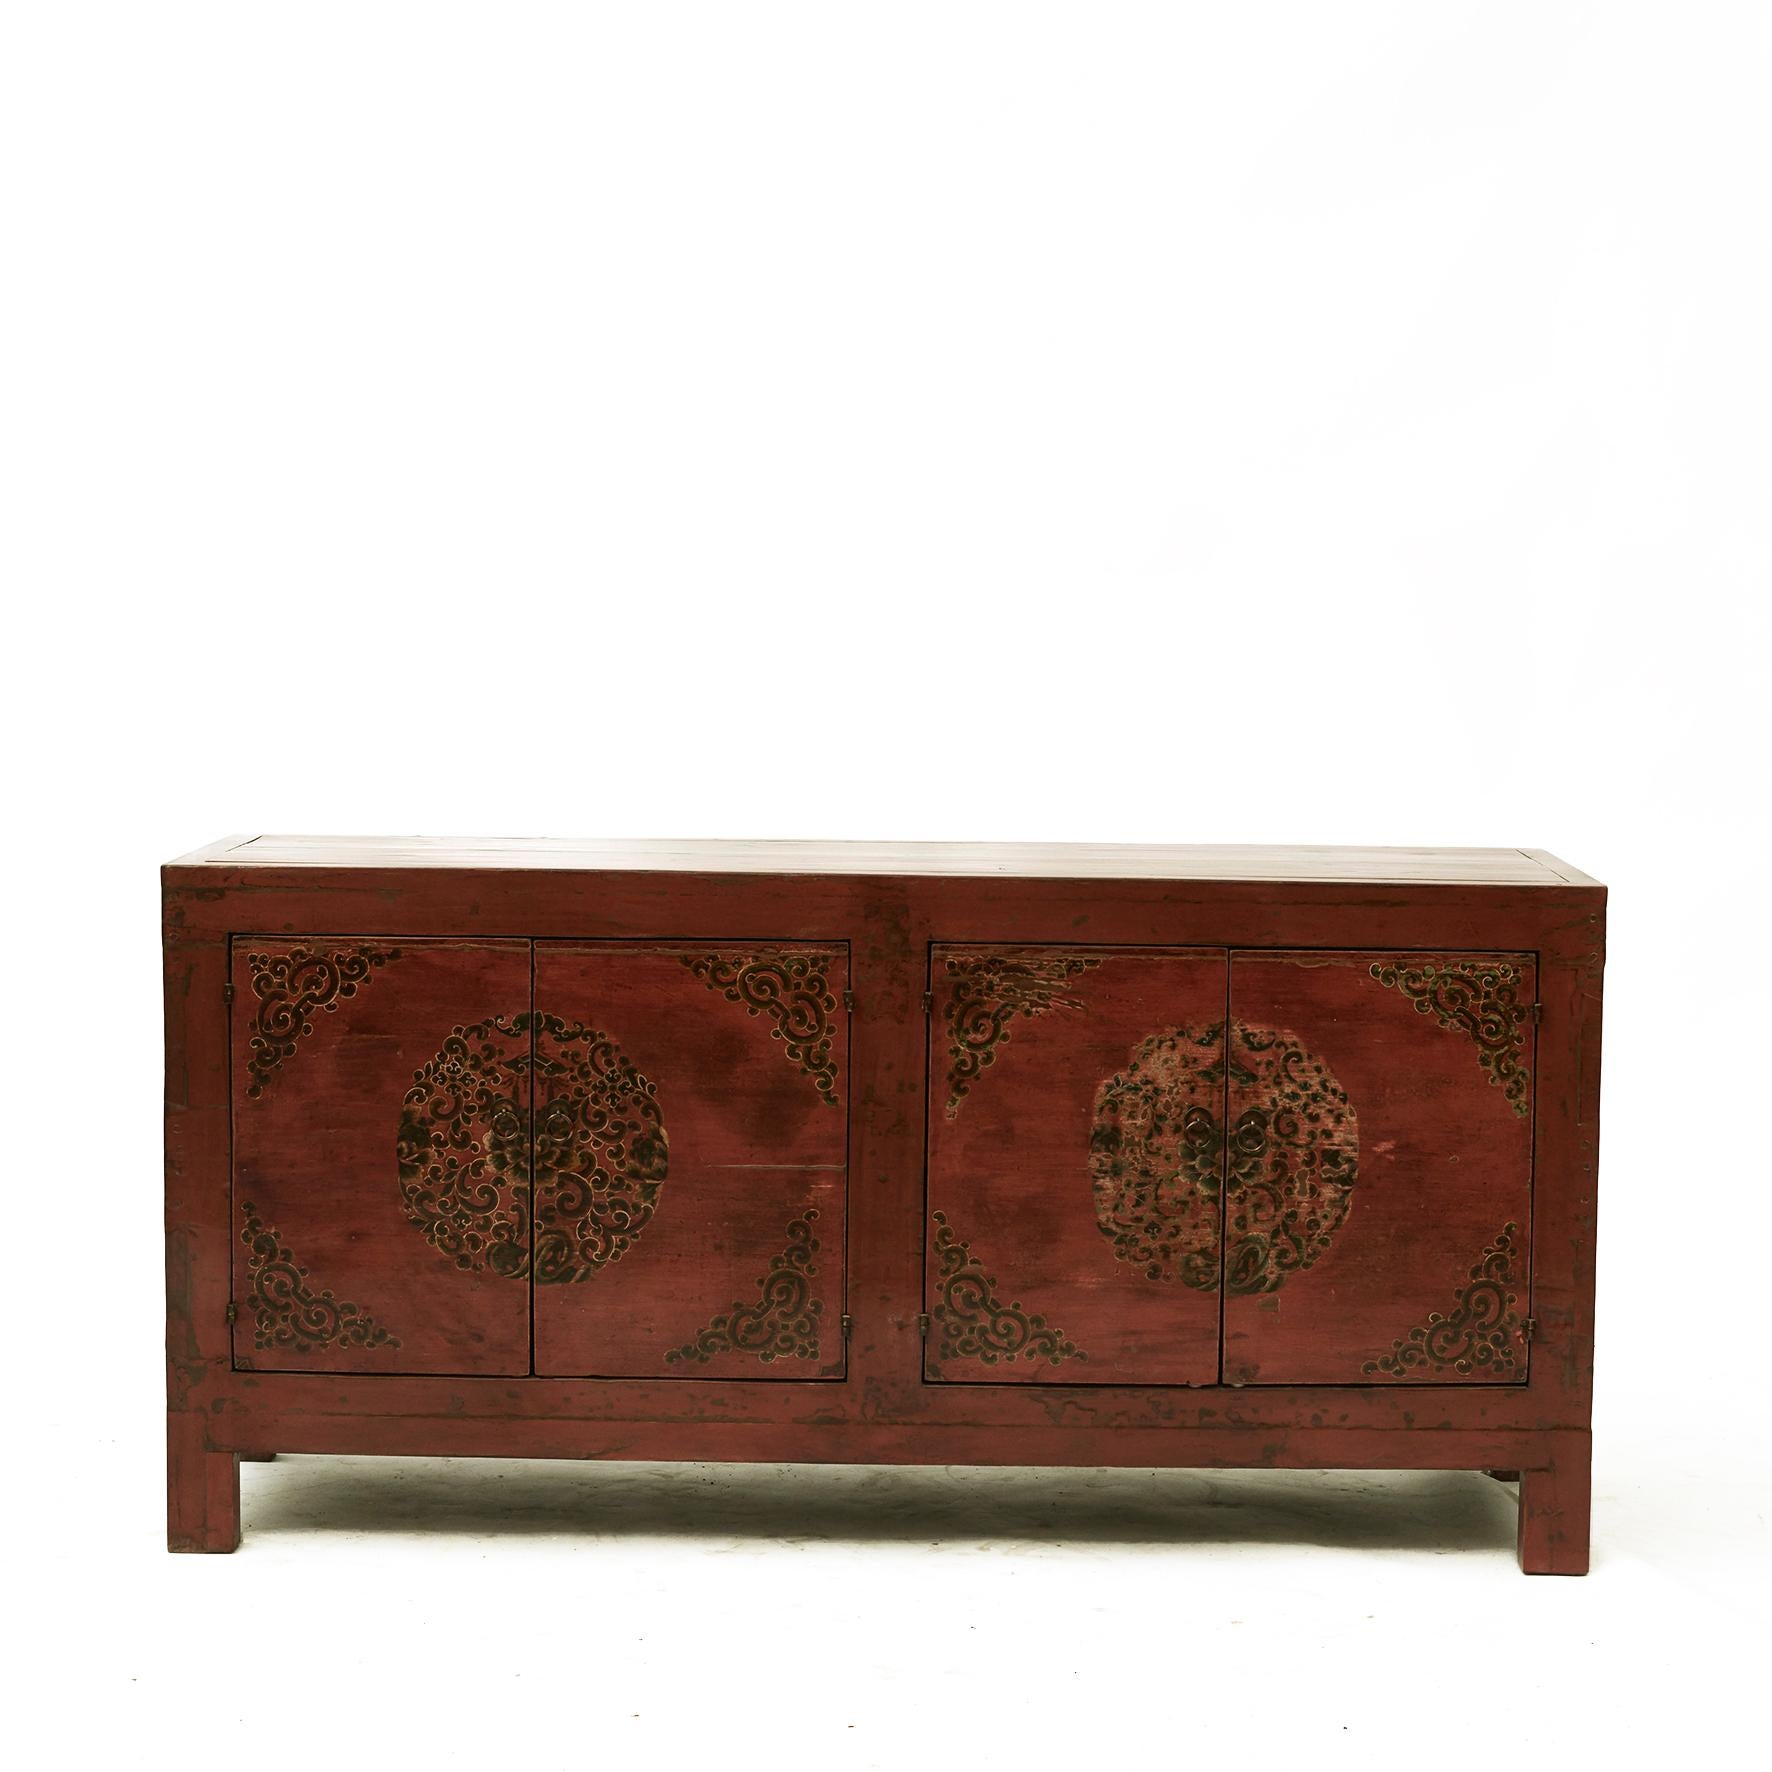 Sideboard with two pairs of doors, original ruby ??red lacquer color and doors decorated in polychrome lacquer colours.
Natural beautiful age-related patina.

Shandong Province 1850 - 1870.